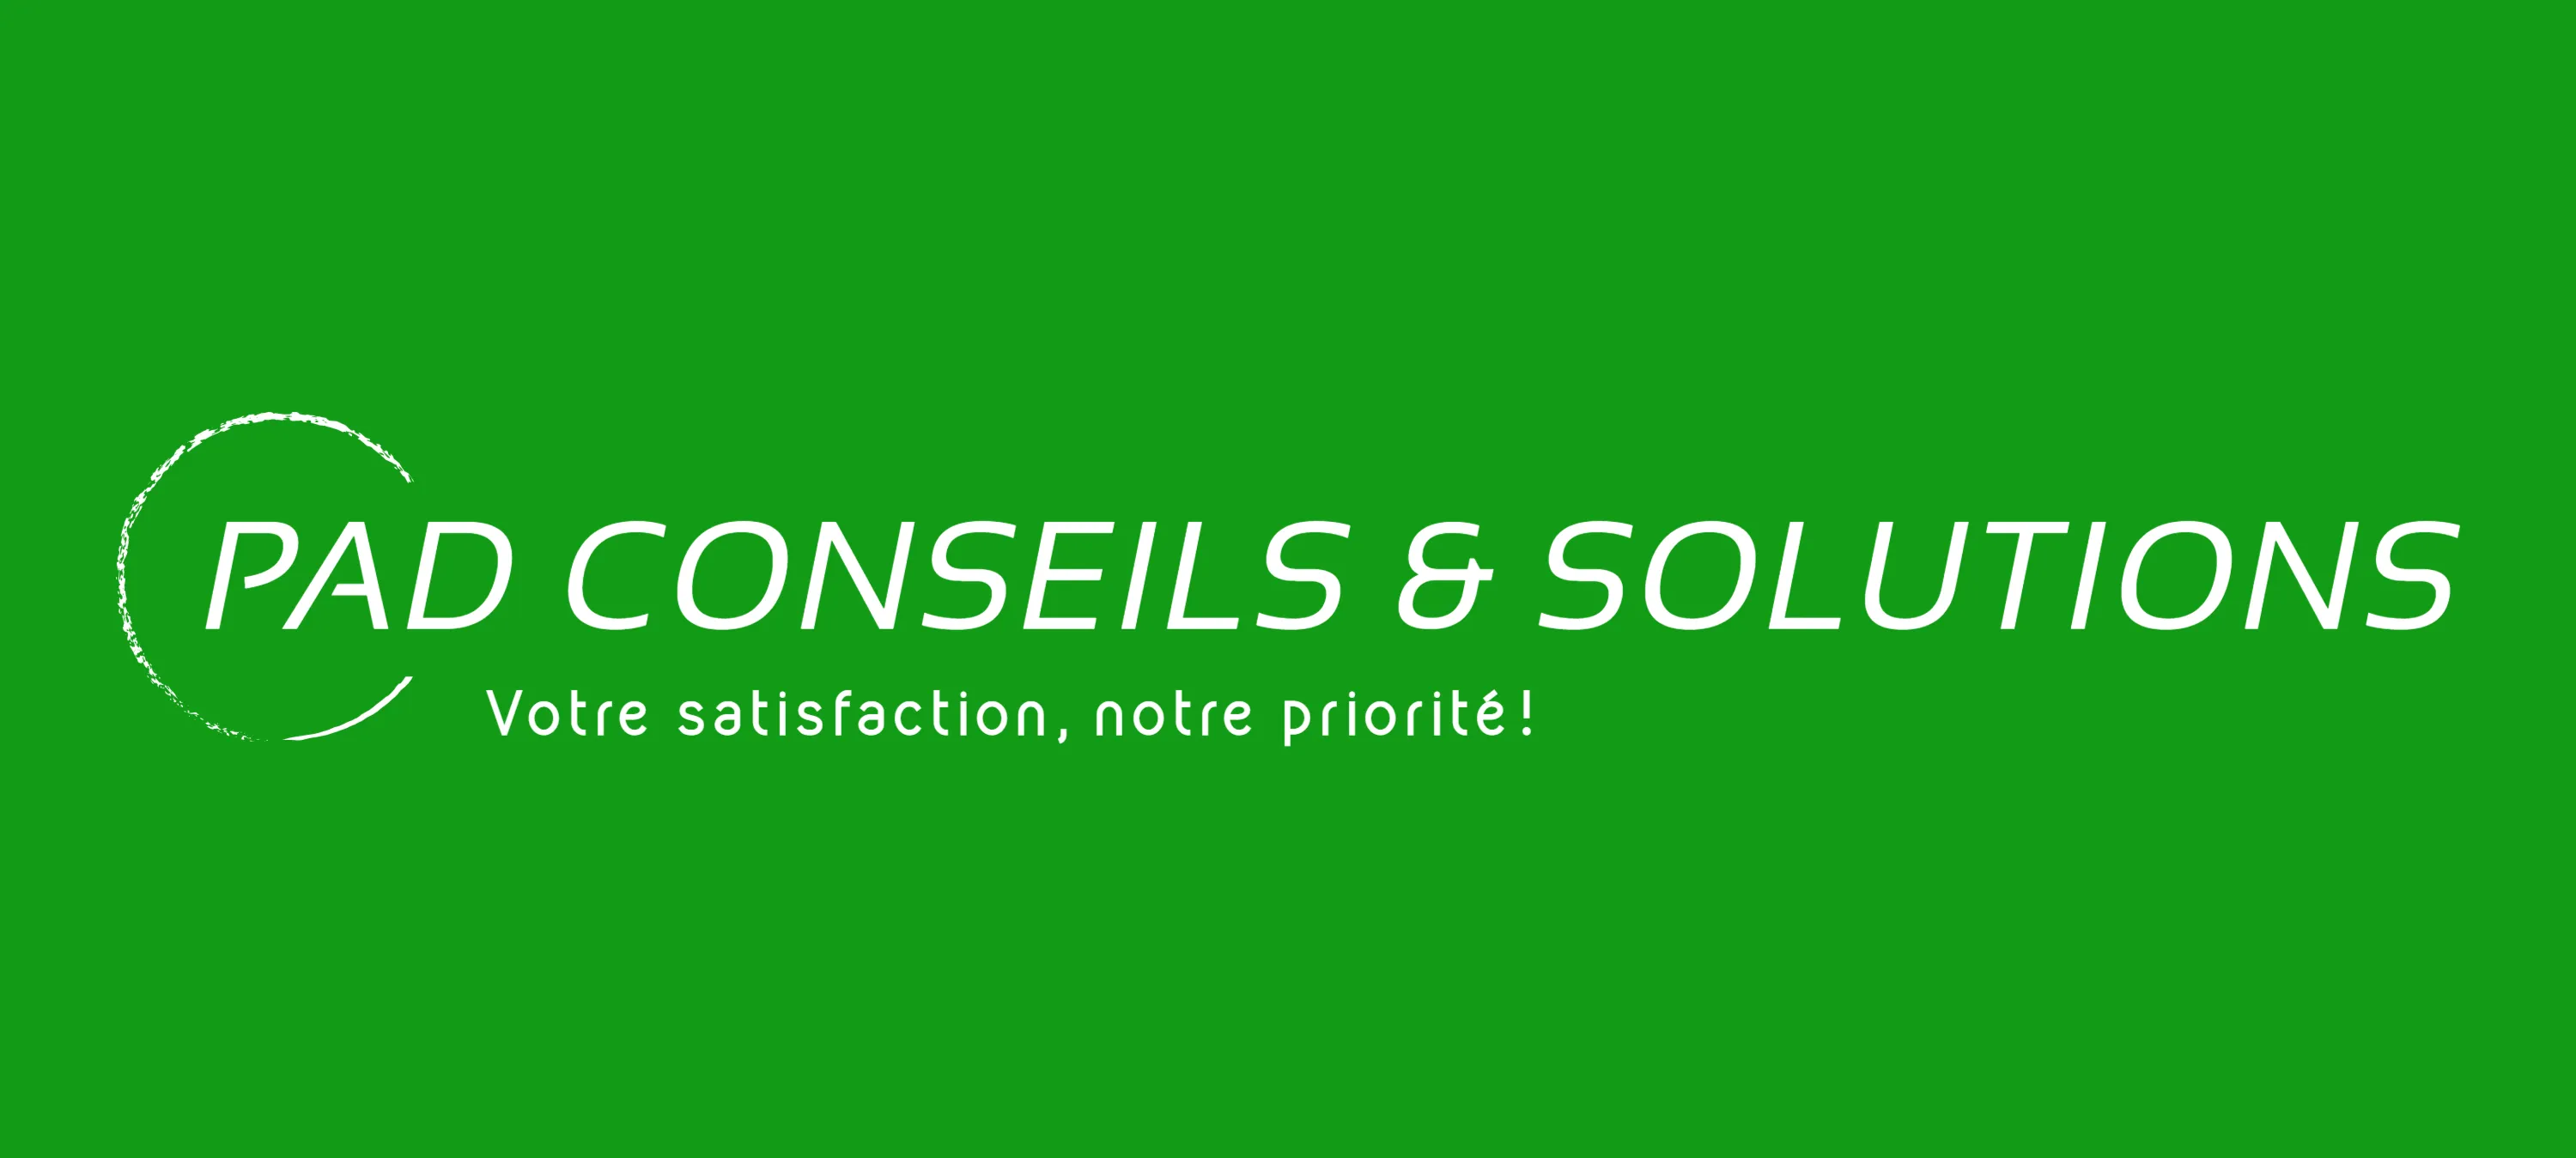  PAD CONSEILS & SOLUTIONS